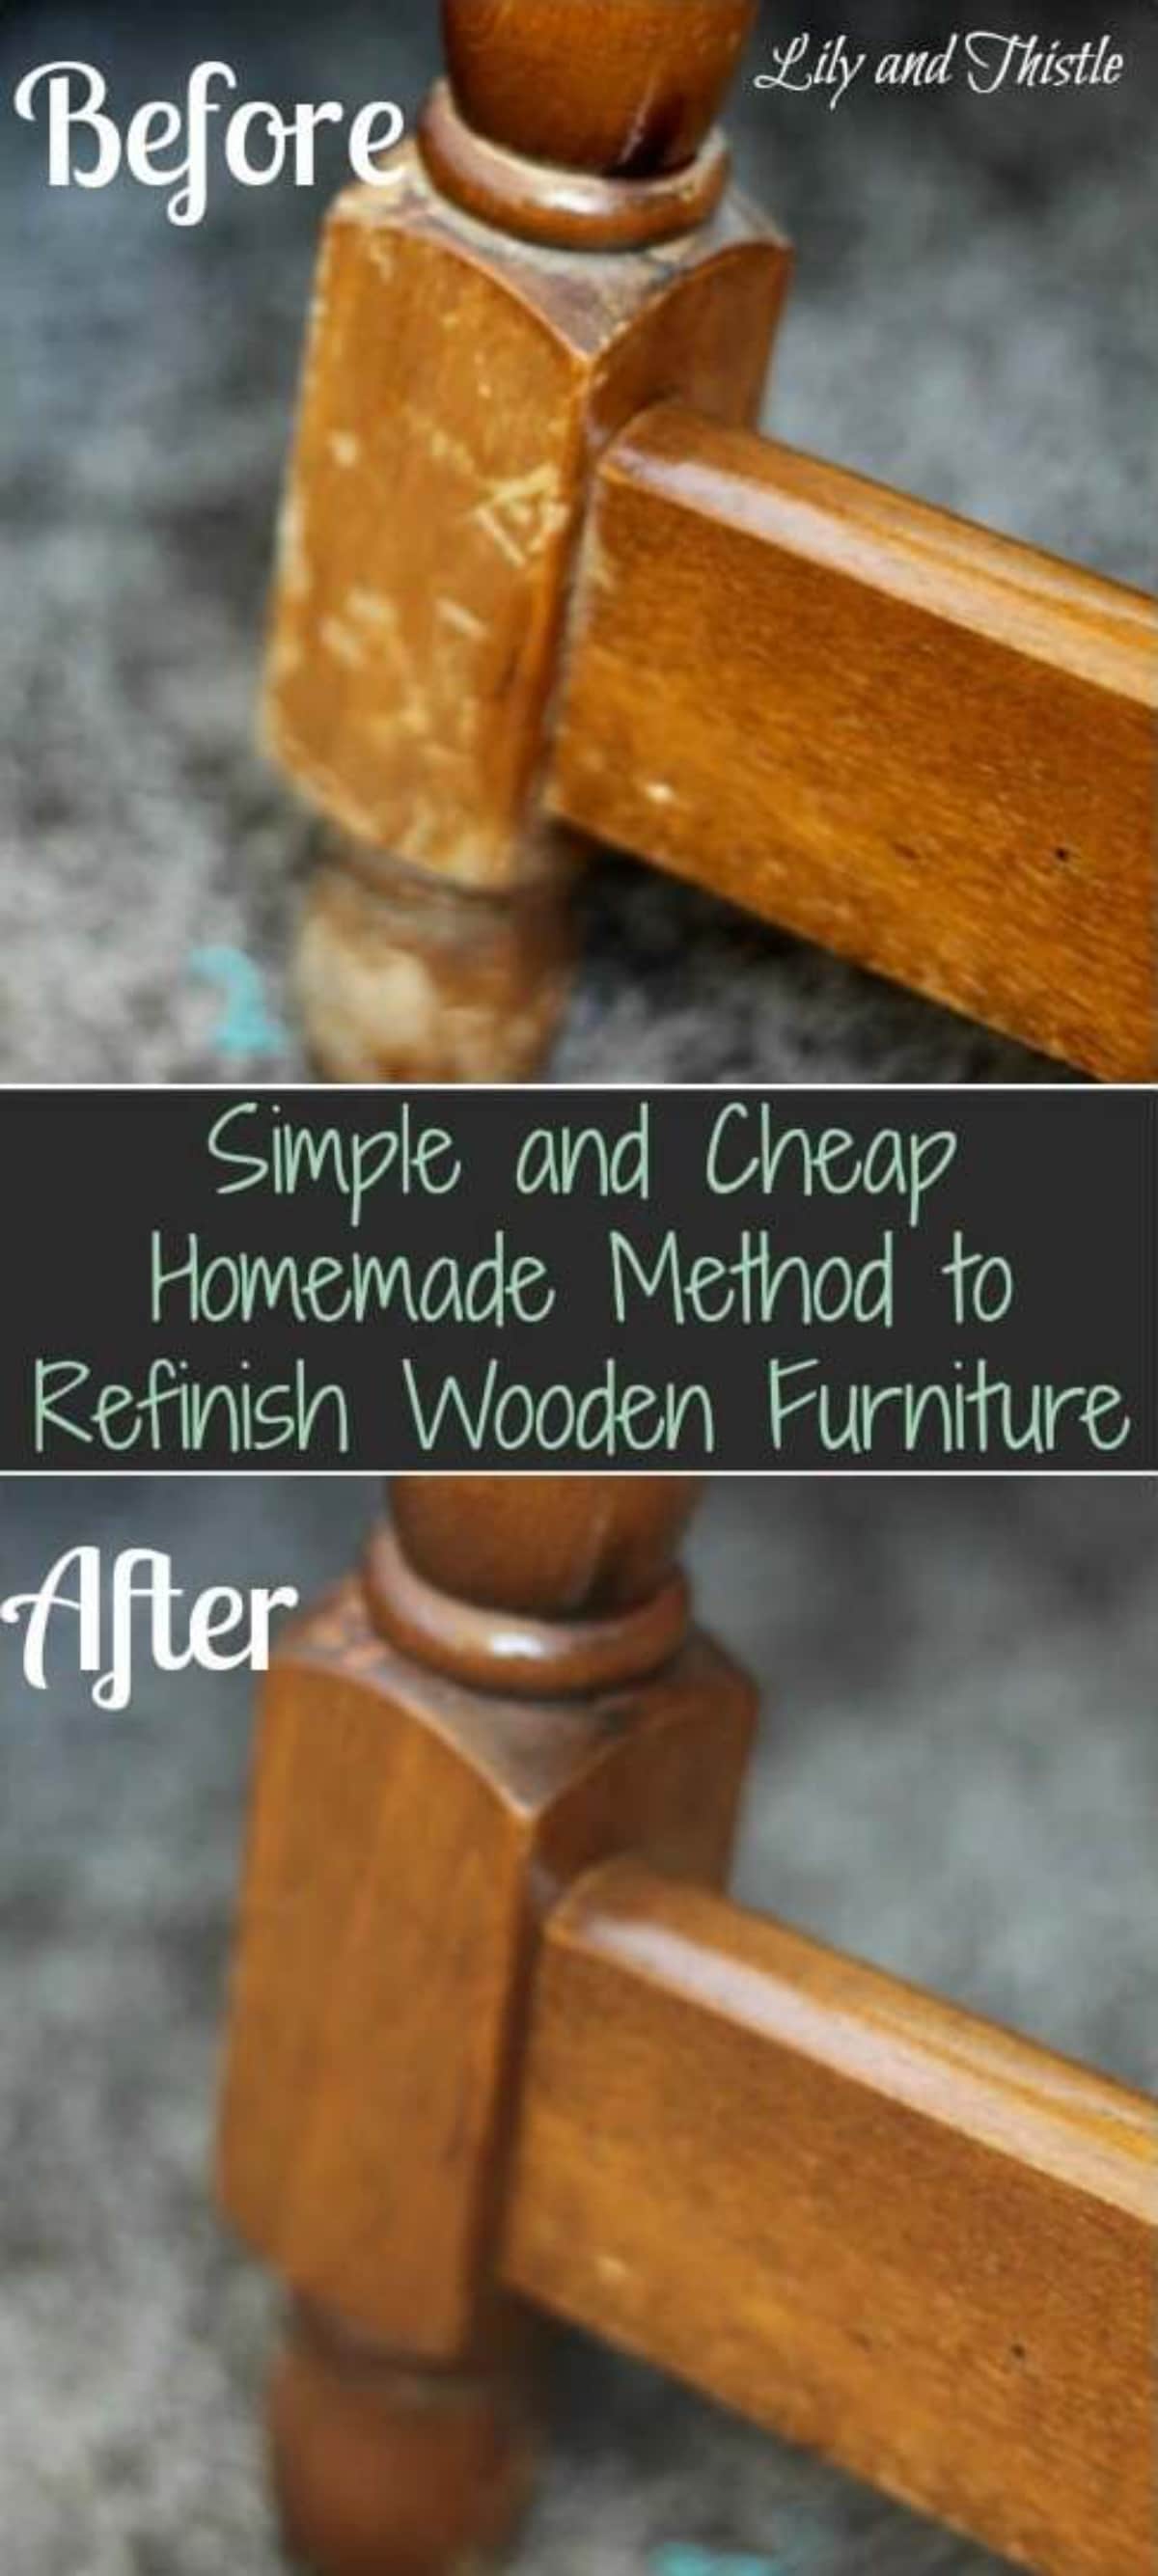 Simple and Cheap Homemade Method to Refinish Wooden Furniture pinterest image.